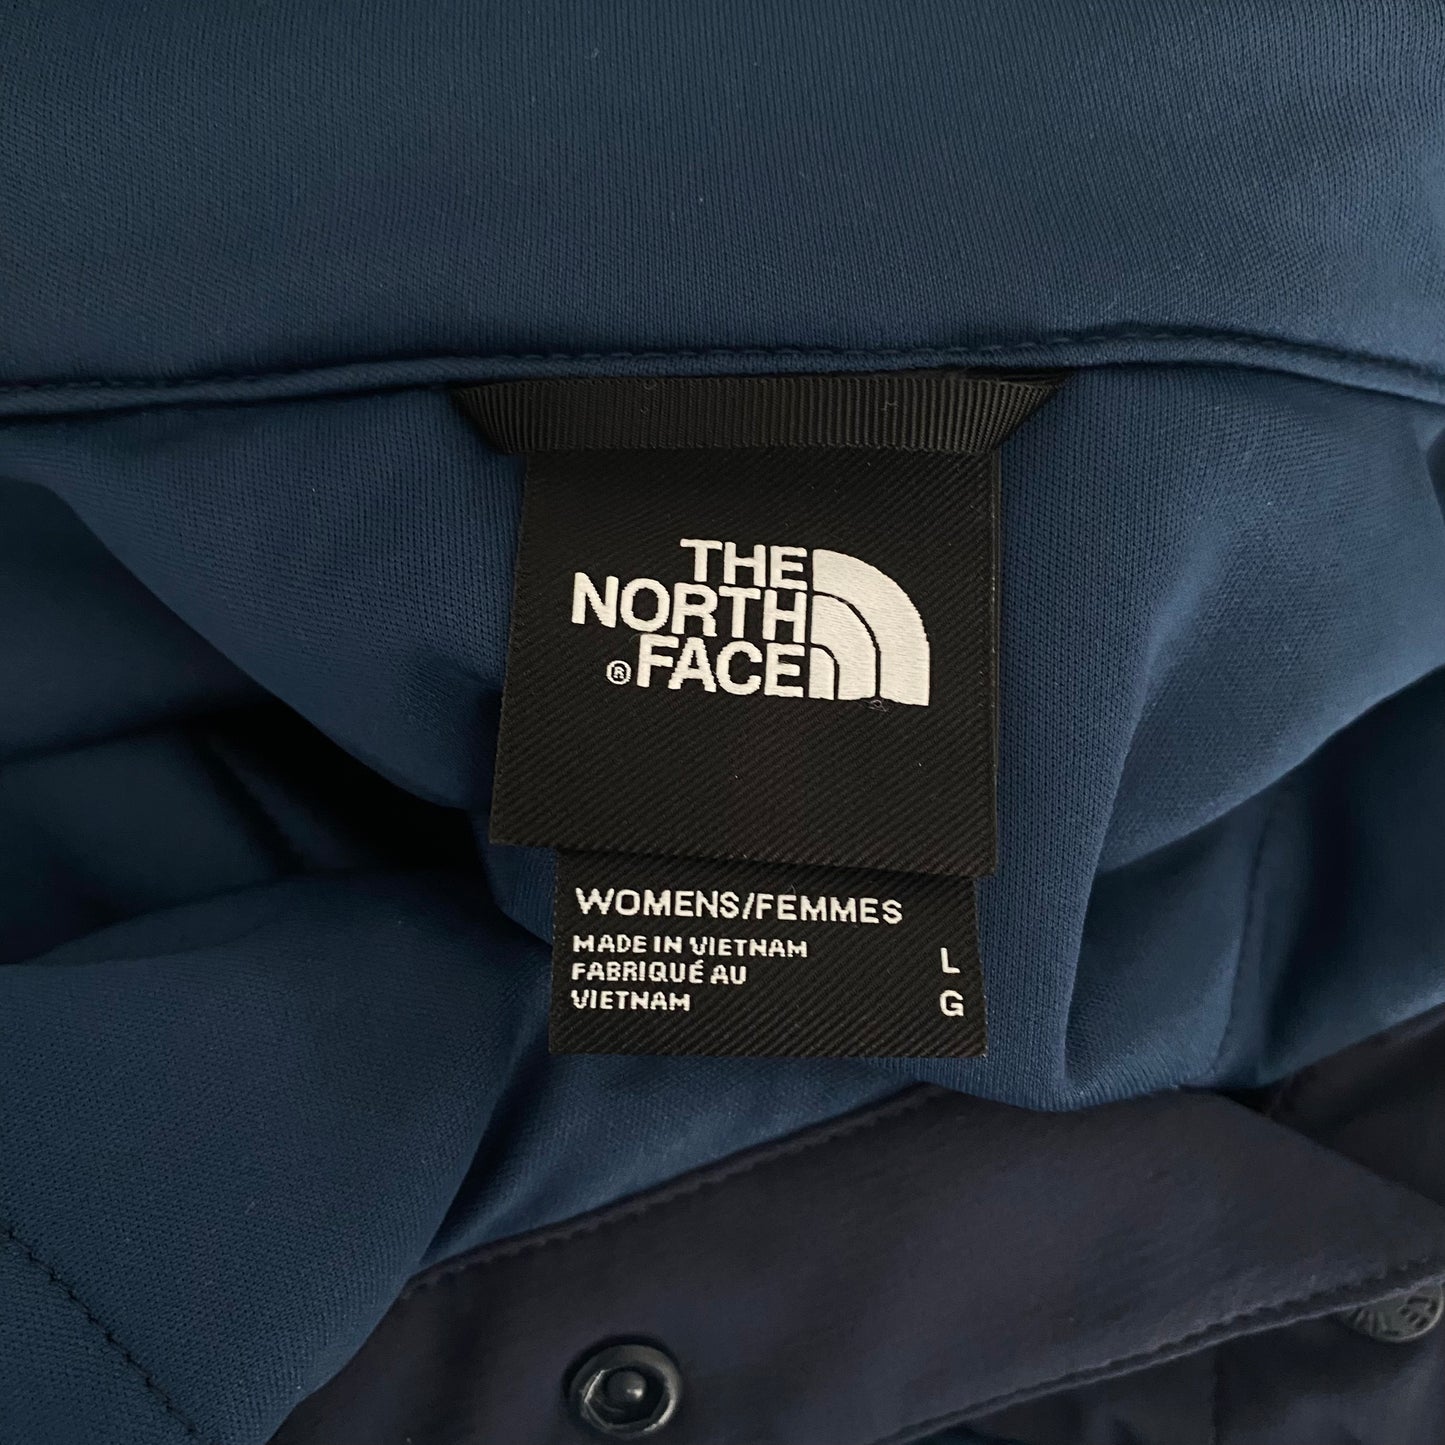 The North Face Mountain Sweatshirt Pullover Anorak 3.0 Size Large